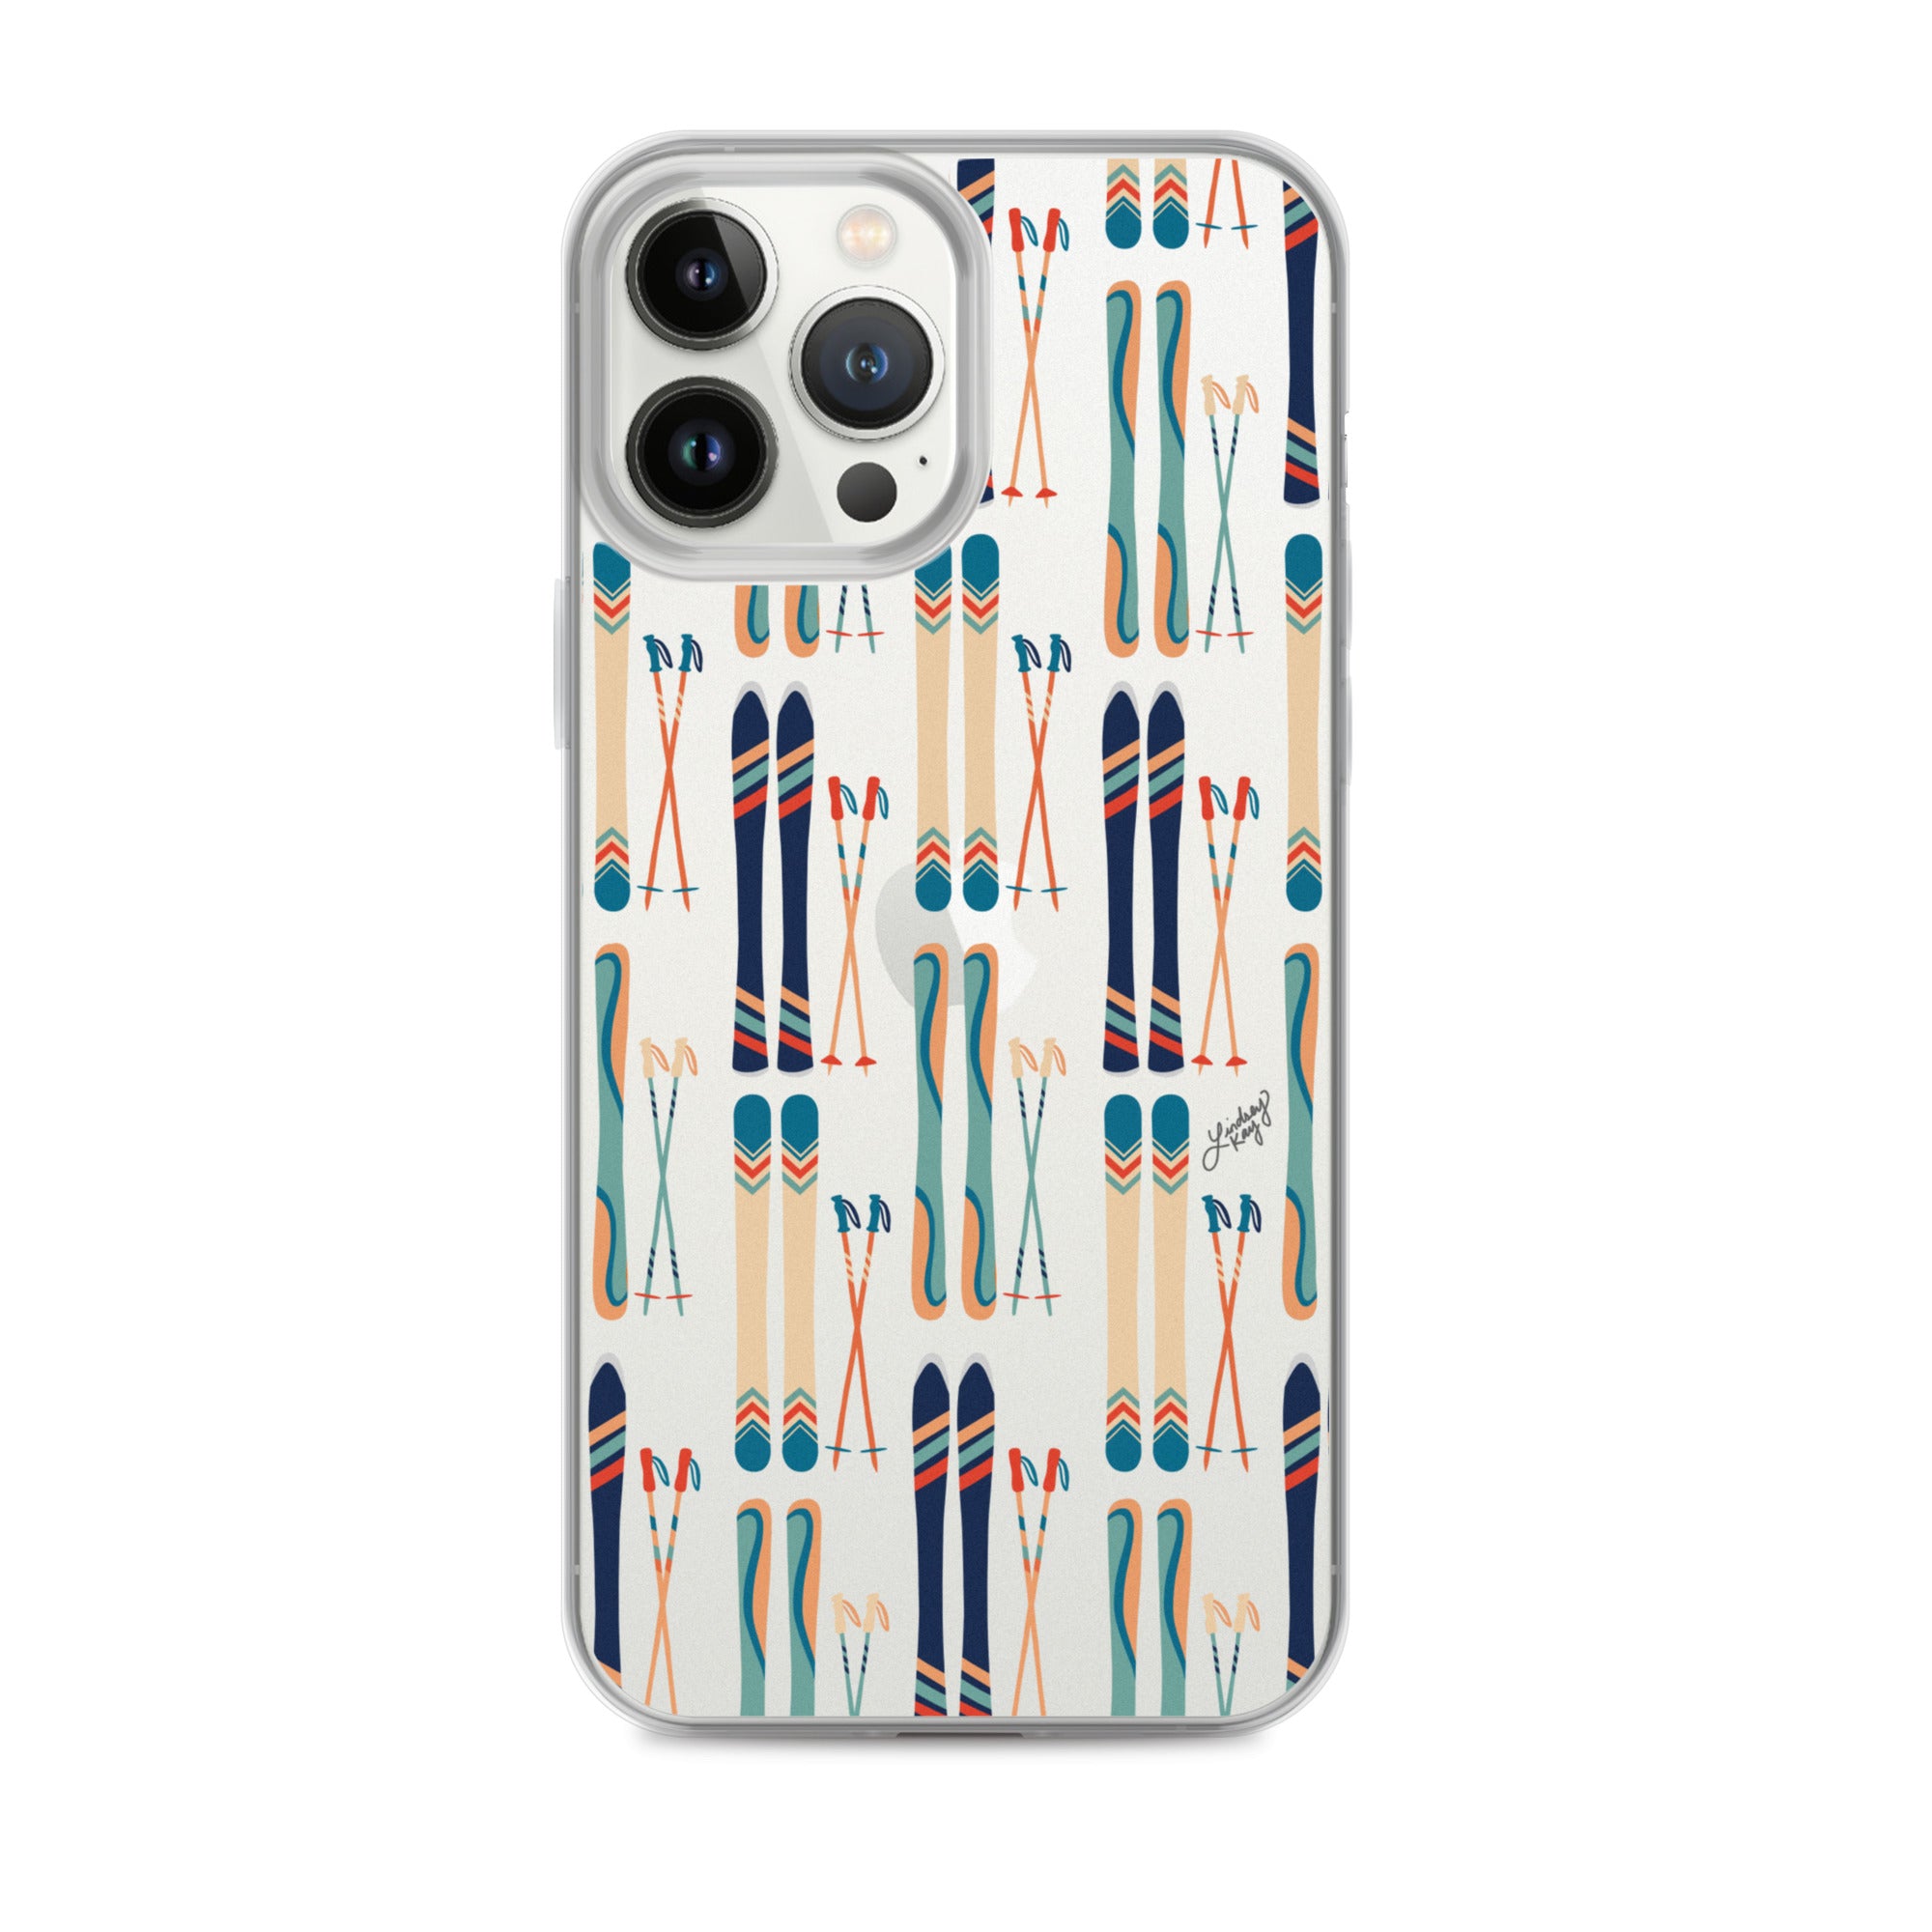 skis and poles skier mountain illustration lindsey kay collective iphone-15 iphone clear case cover 